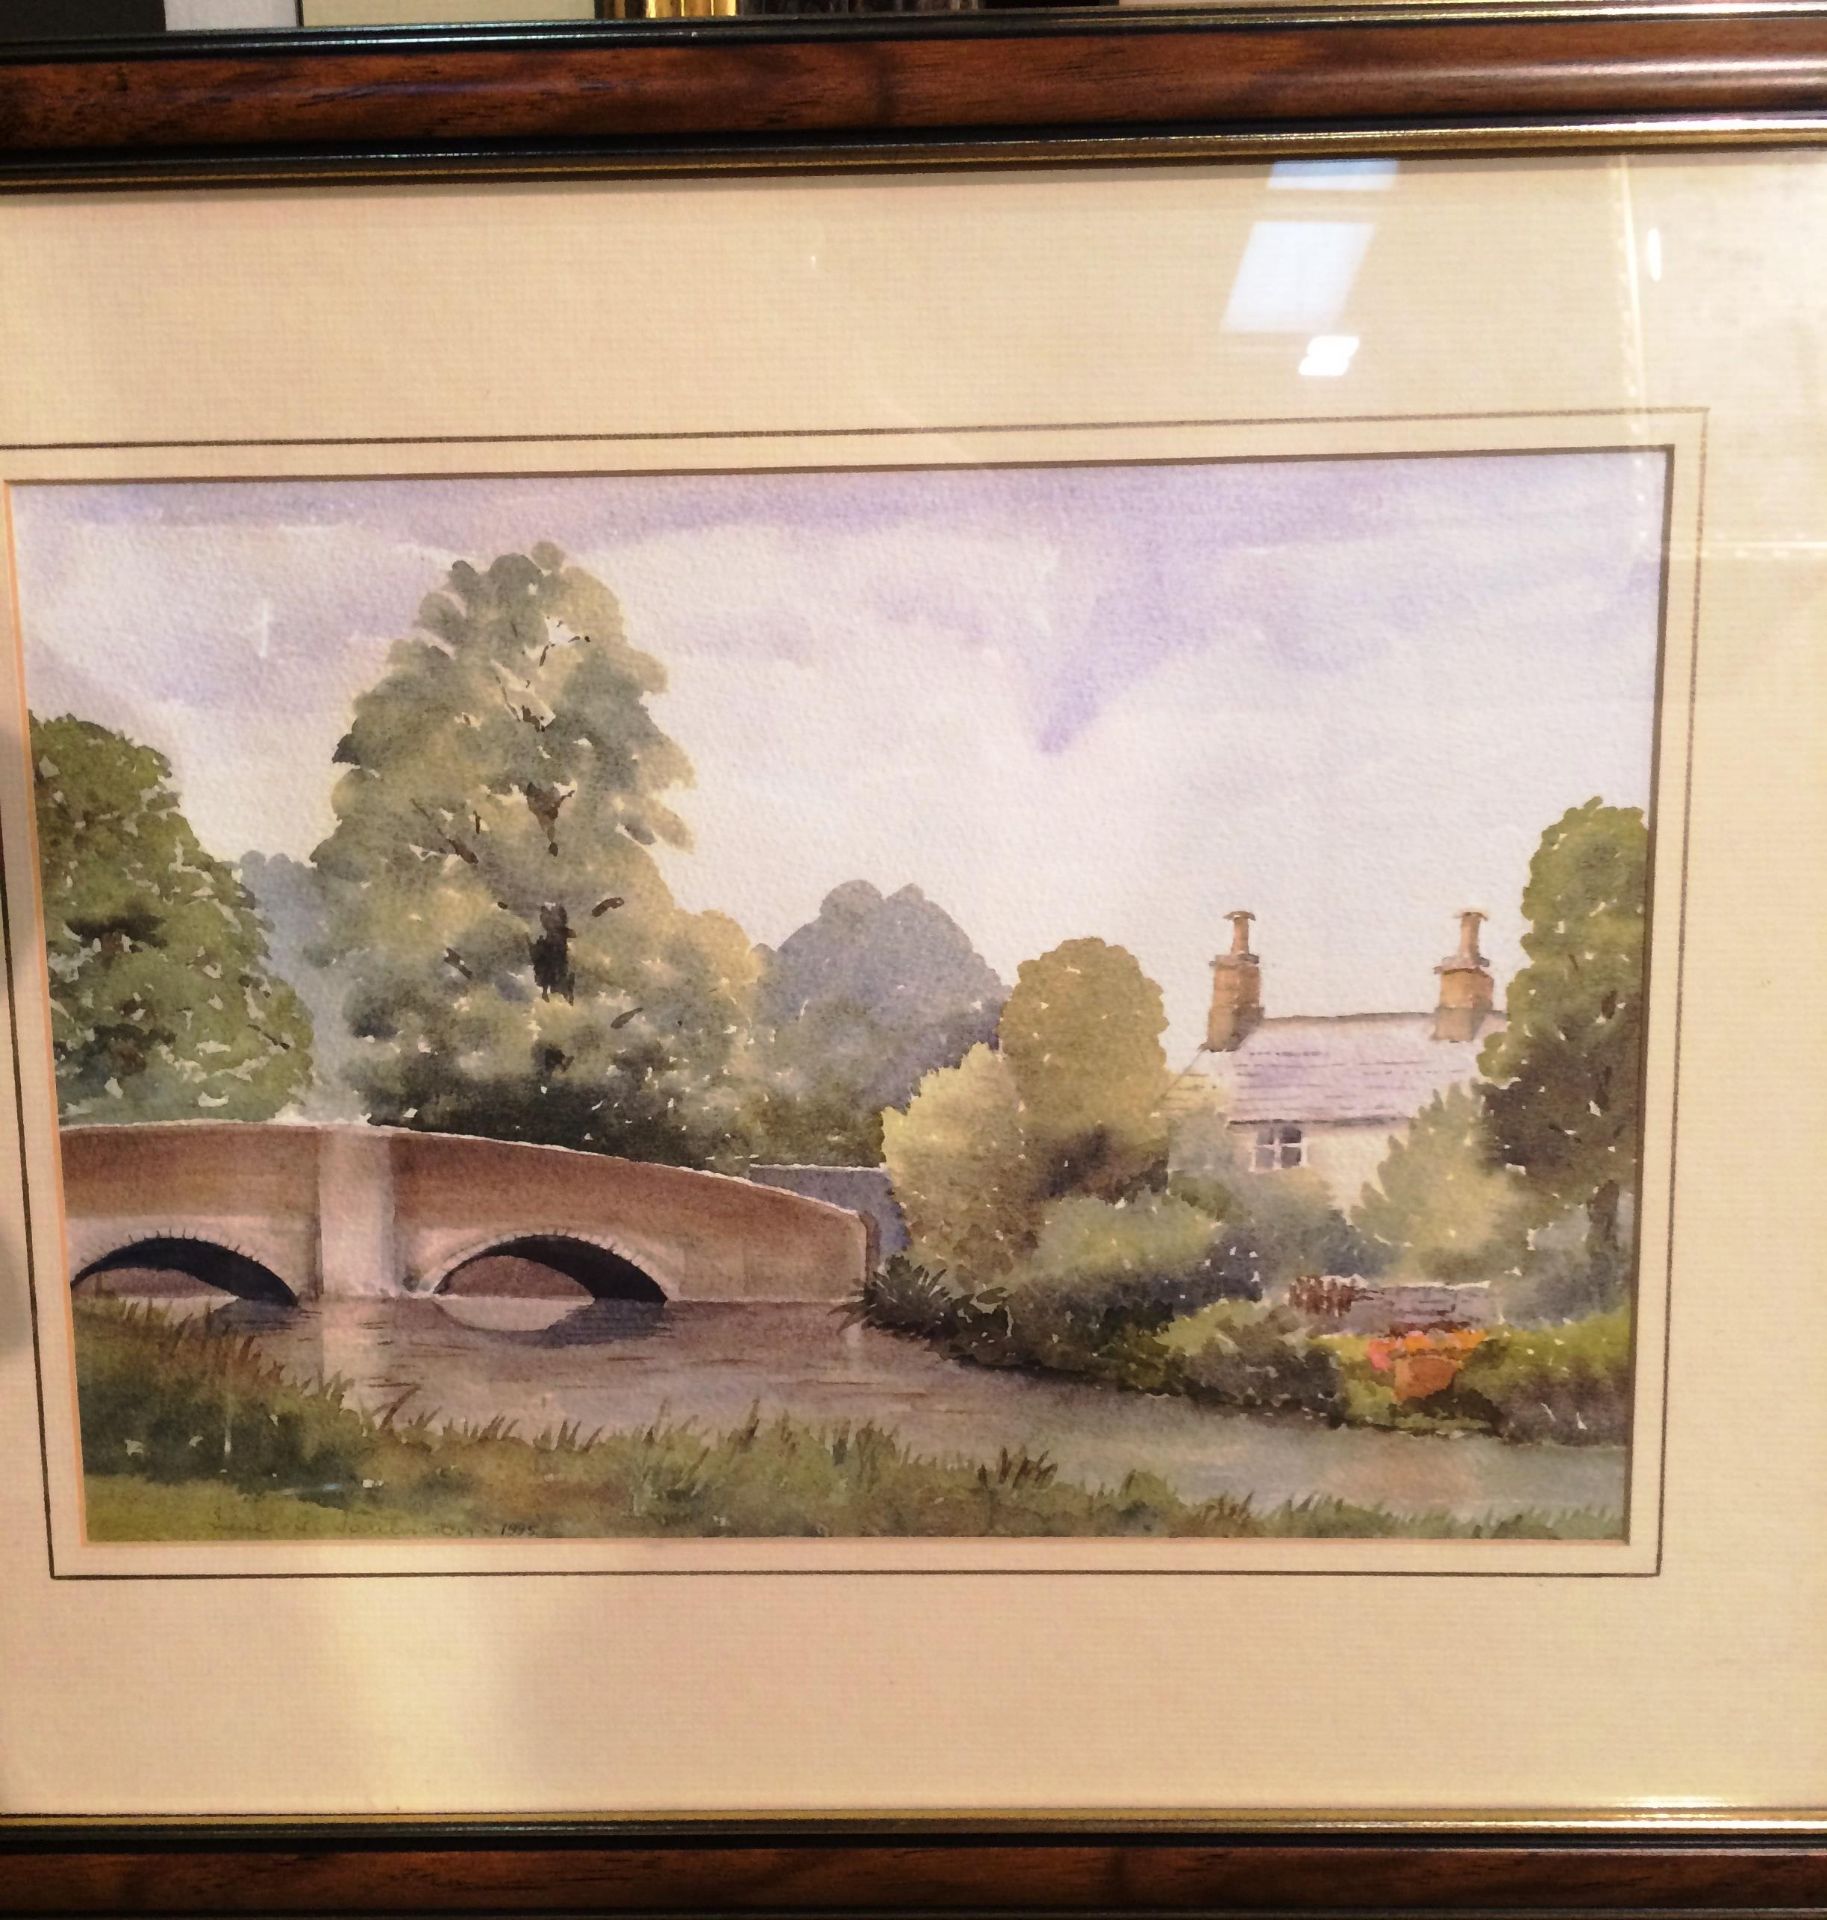 Irene G Tomlinson framed watercolour 'Ashford in the water' 23 x 33cm signed and dated 1995